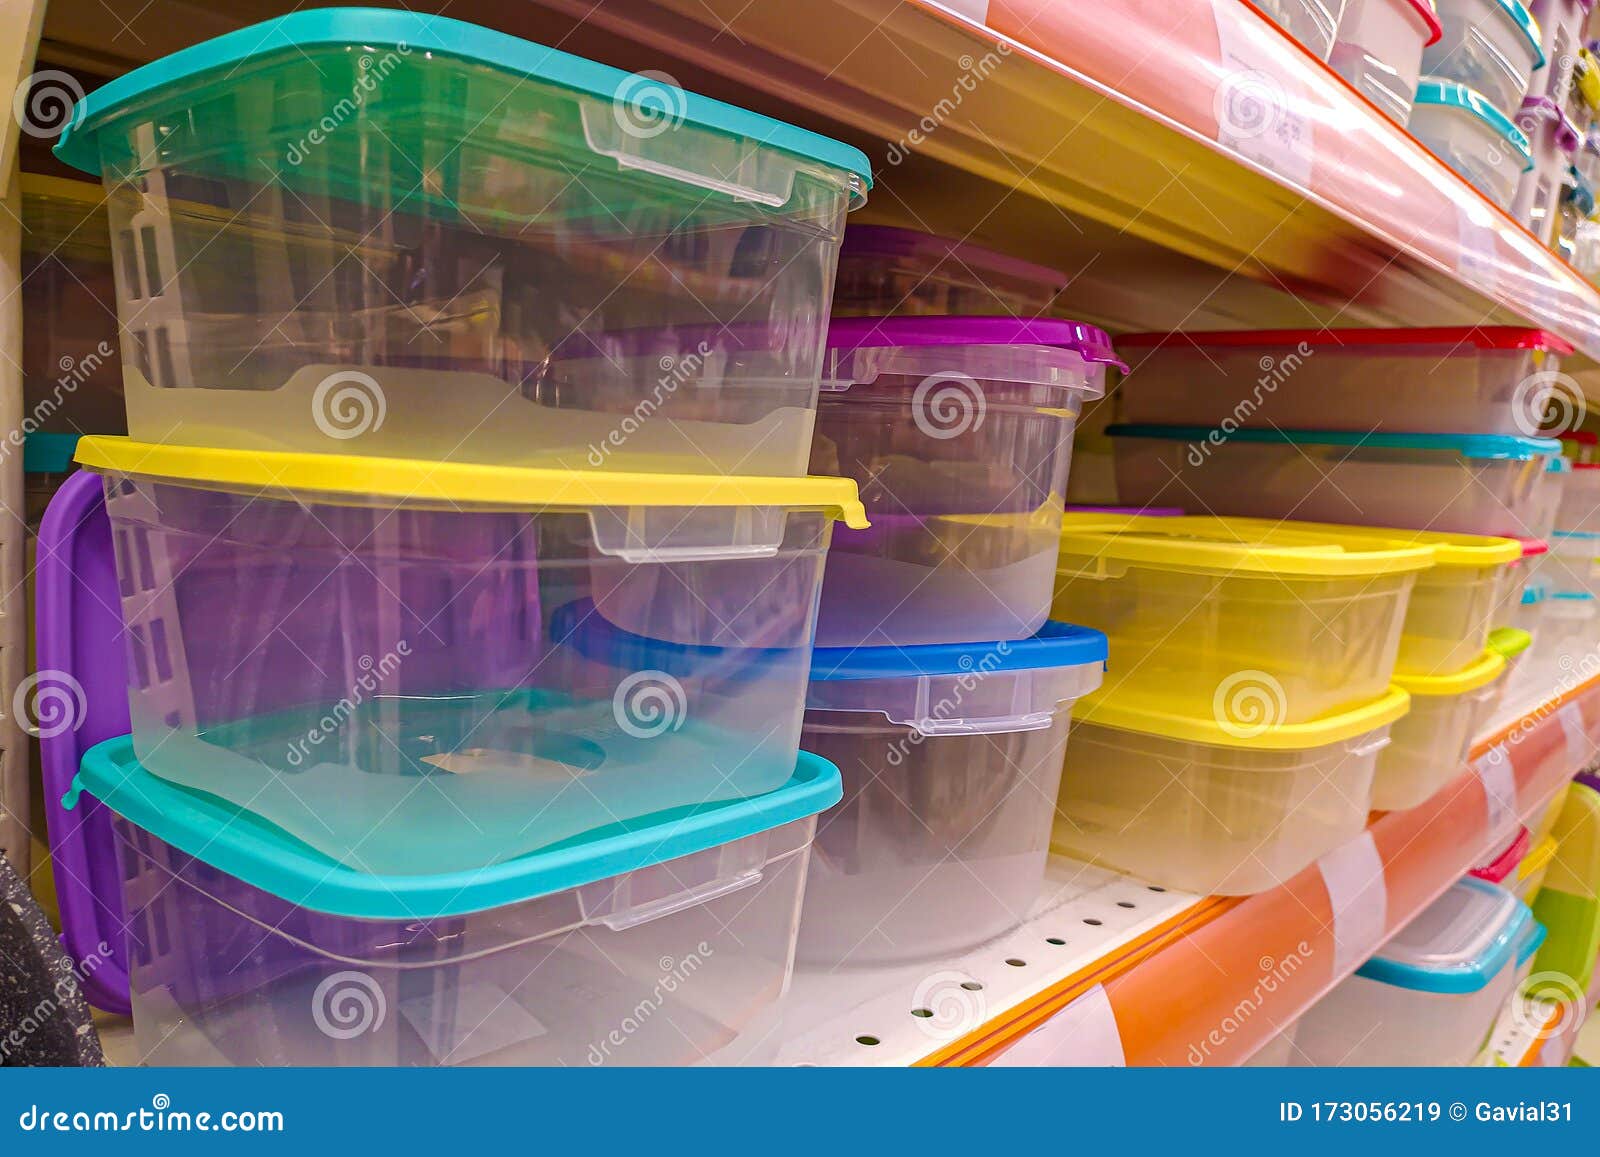 Plastic Food Containers on a Shelf in a Store. Colorful Containers on a ...